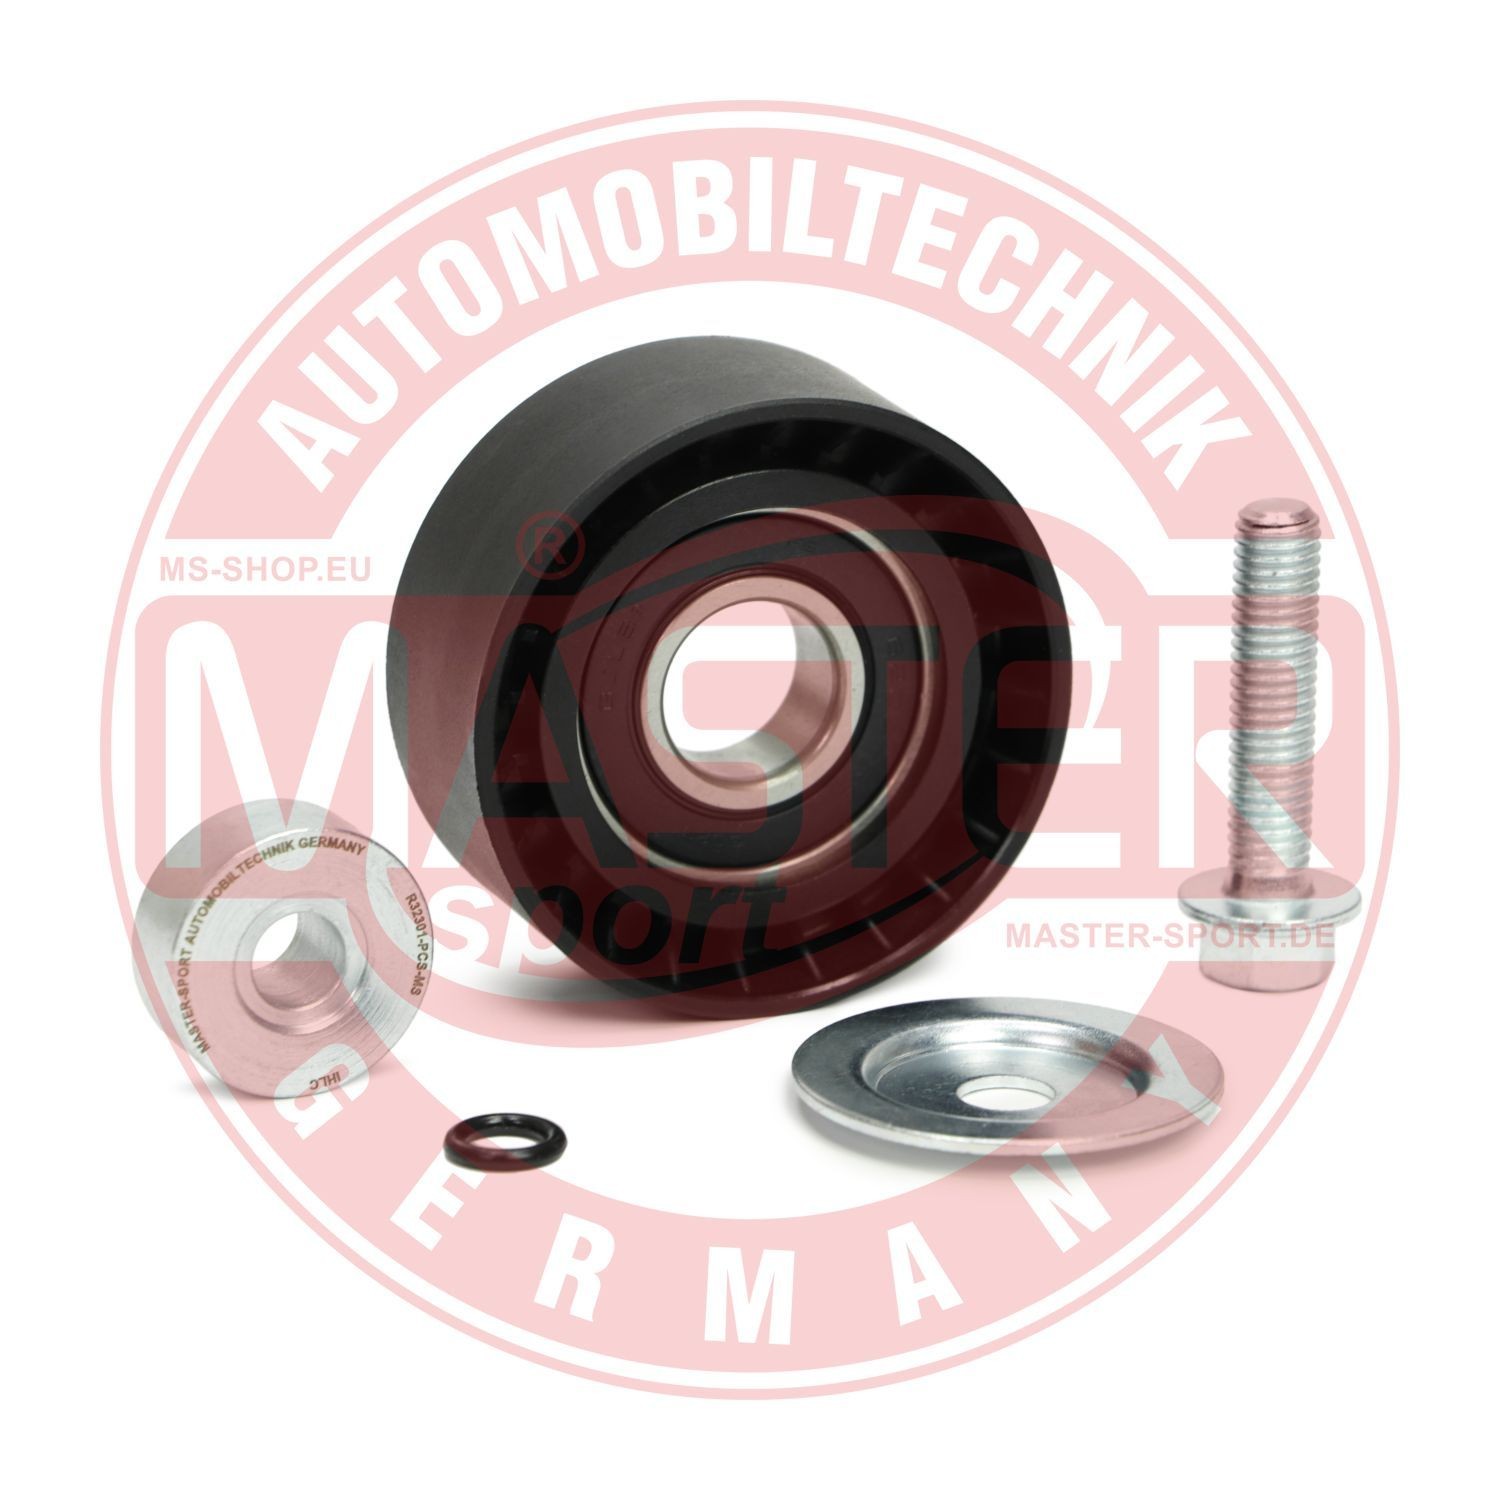 Iveco Deflection / Guide Pulley, v-ribbed belt MASTER-SPORT R32301-PCS-MS at a good price